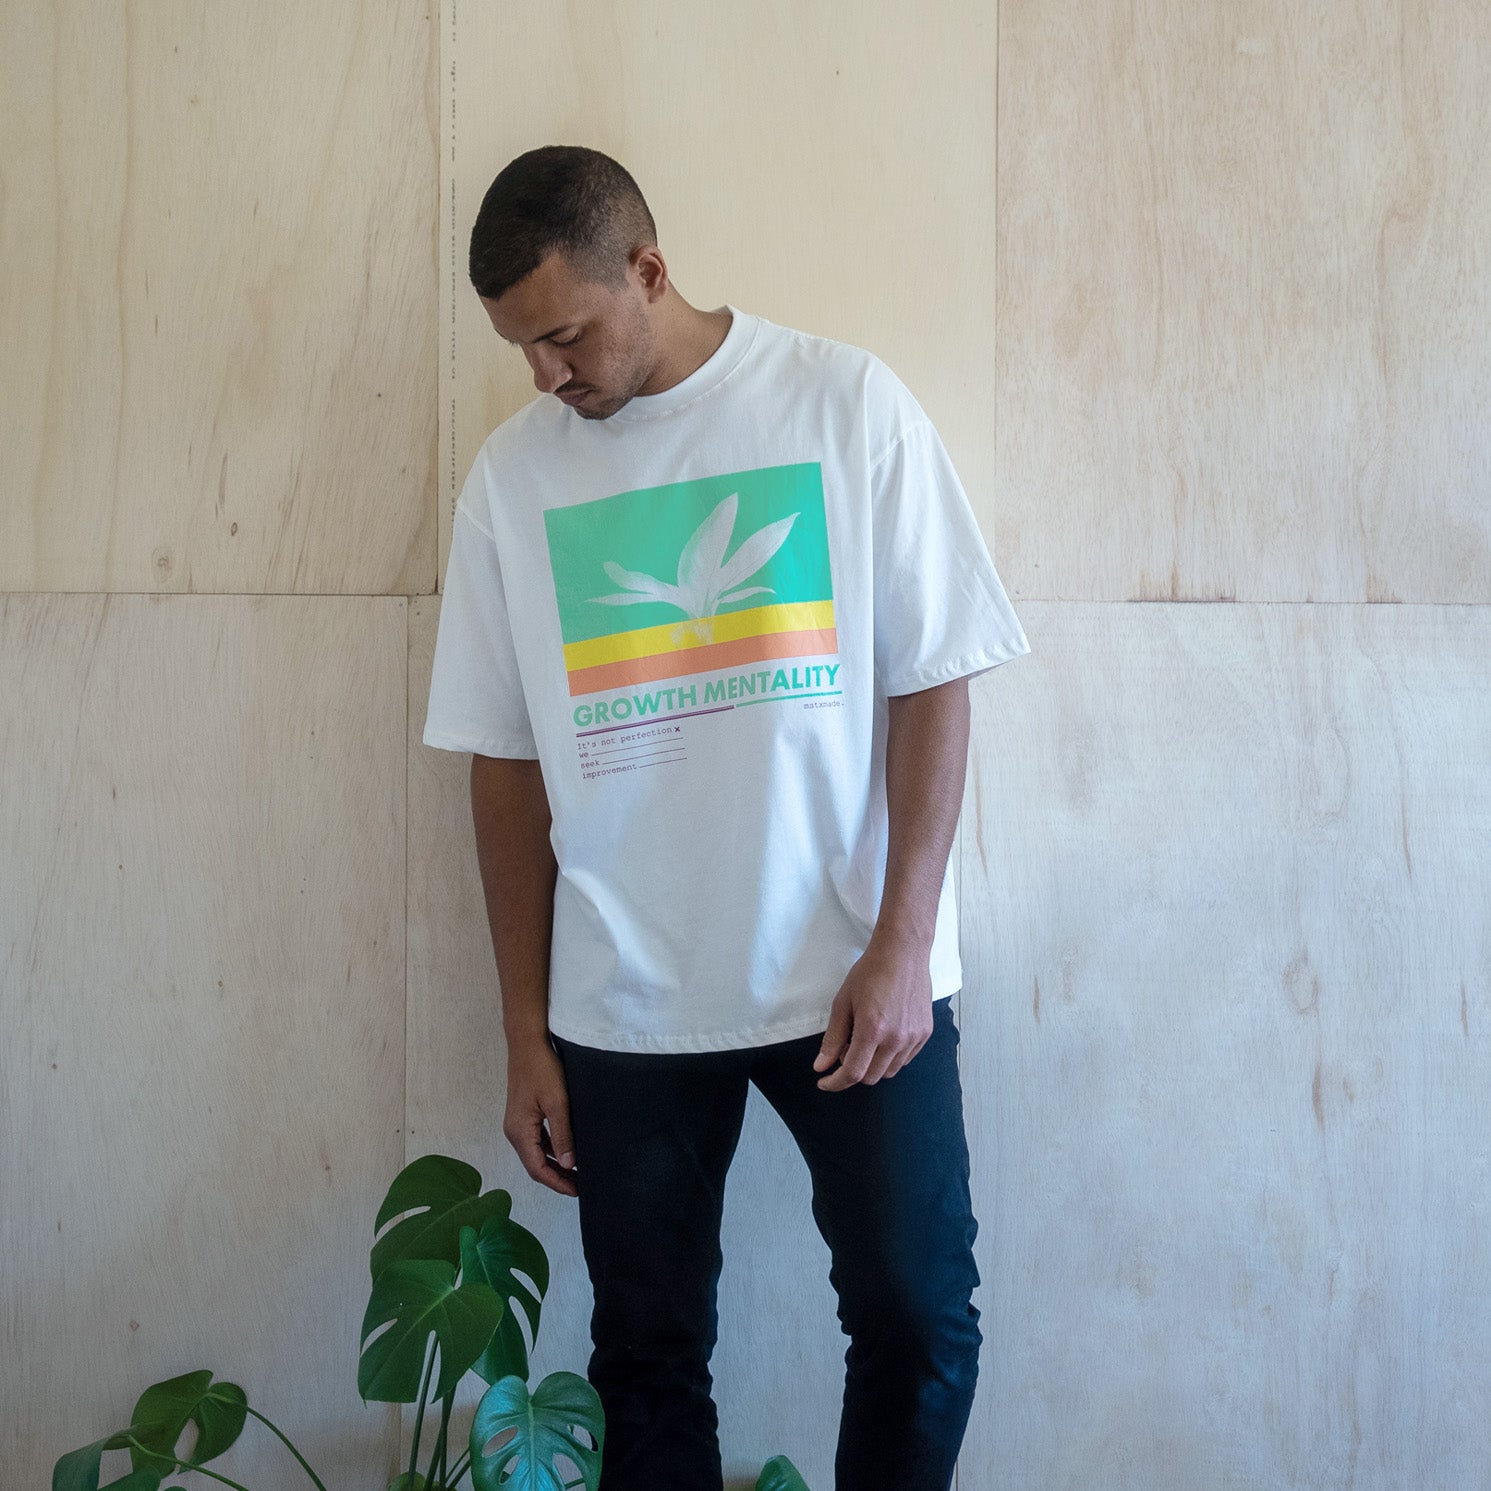 Growth Mentality White oversized t-shirt, Mistakes Made